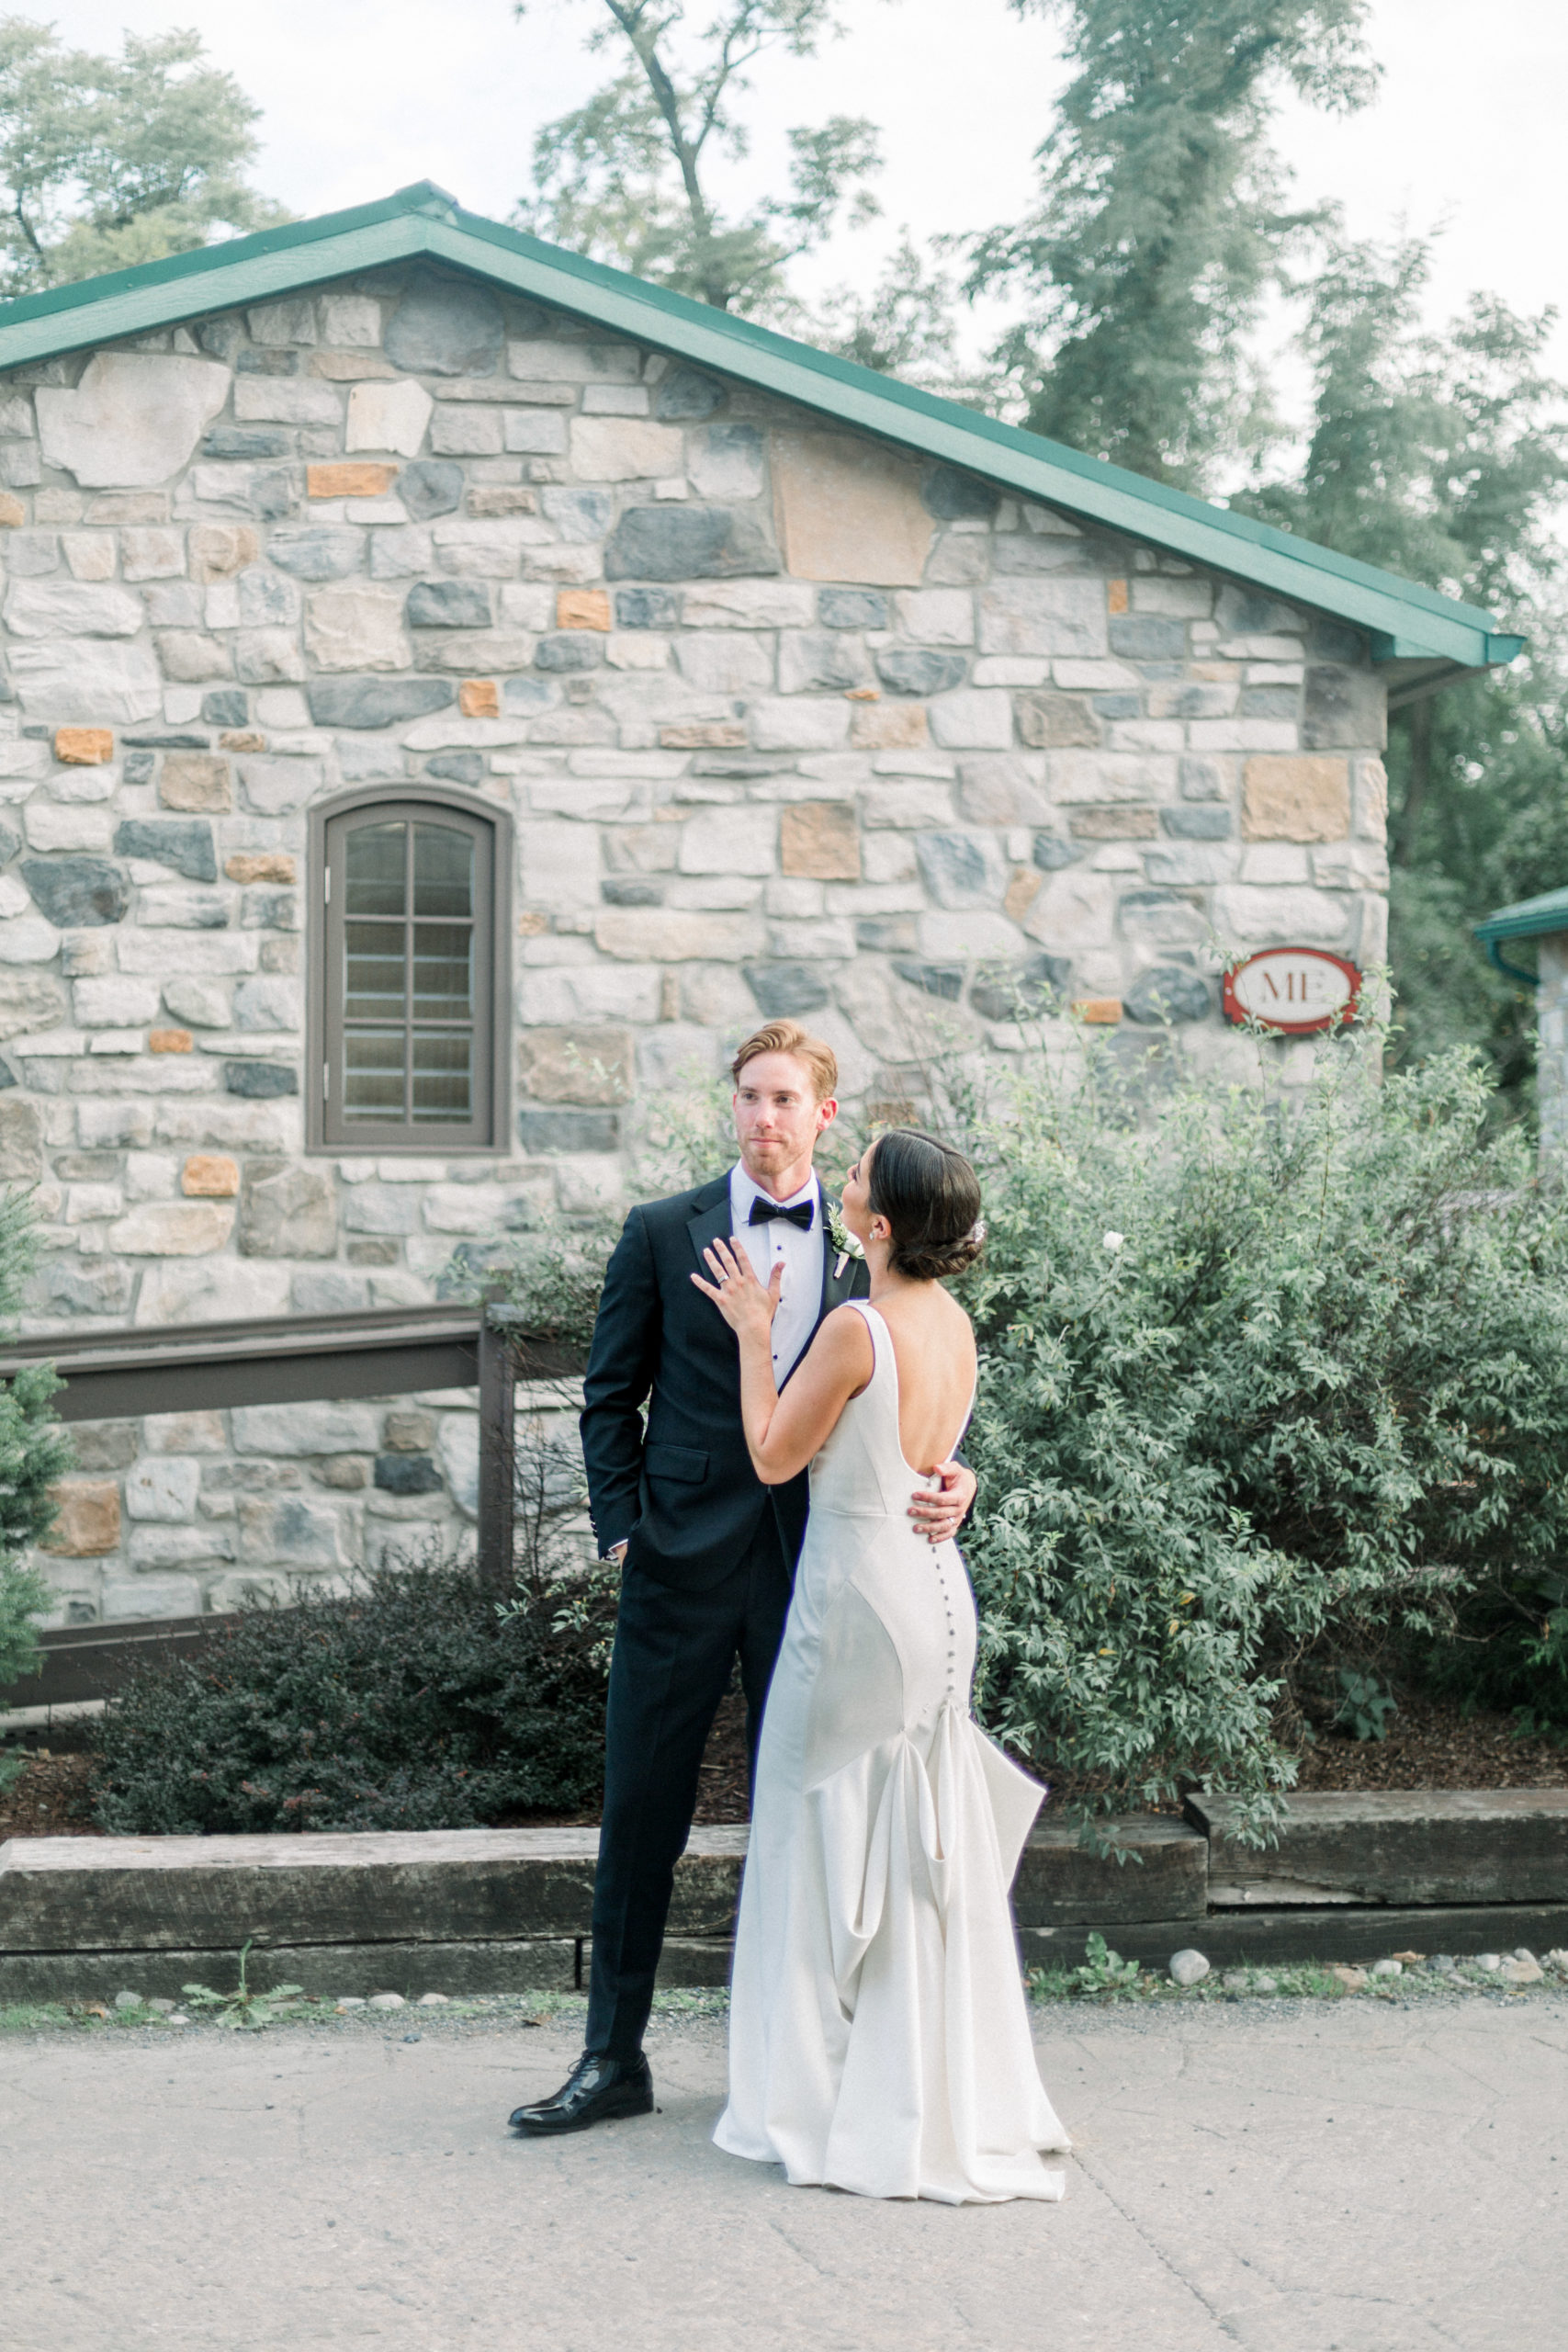 bride and groom embrace each other in front of a stone cottage